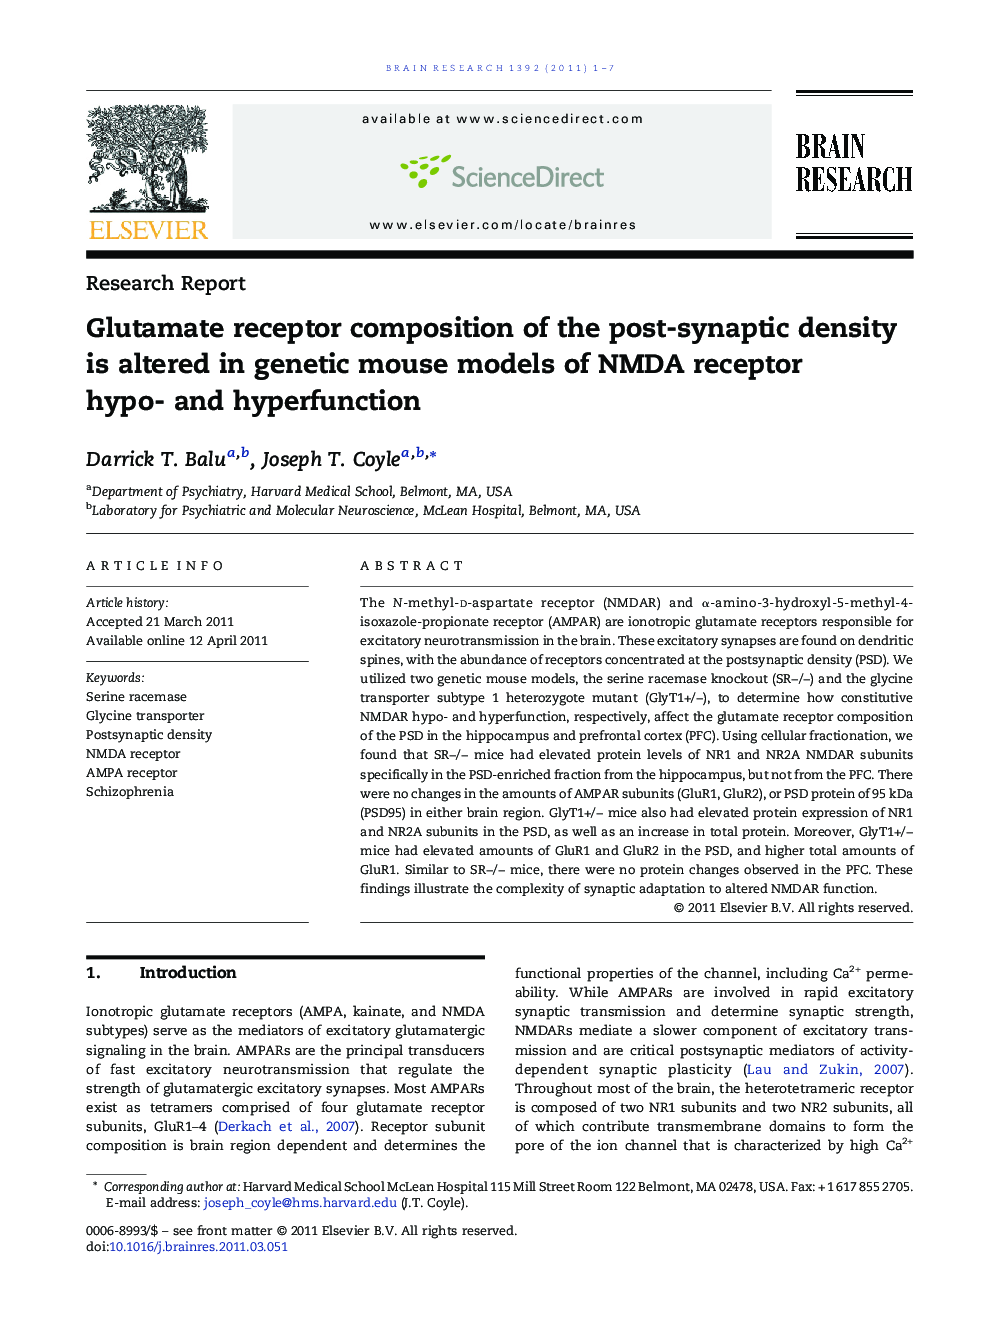 Glutamate receptor composition of the post-synaptic density is altered in genetic mouse models of NMDA receptor hypo- and hyperfunction